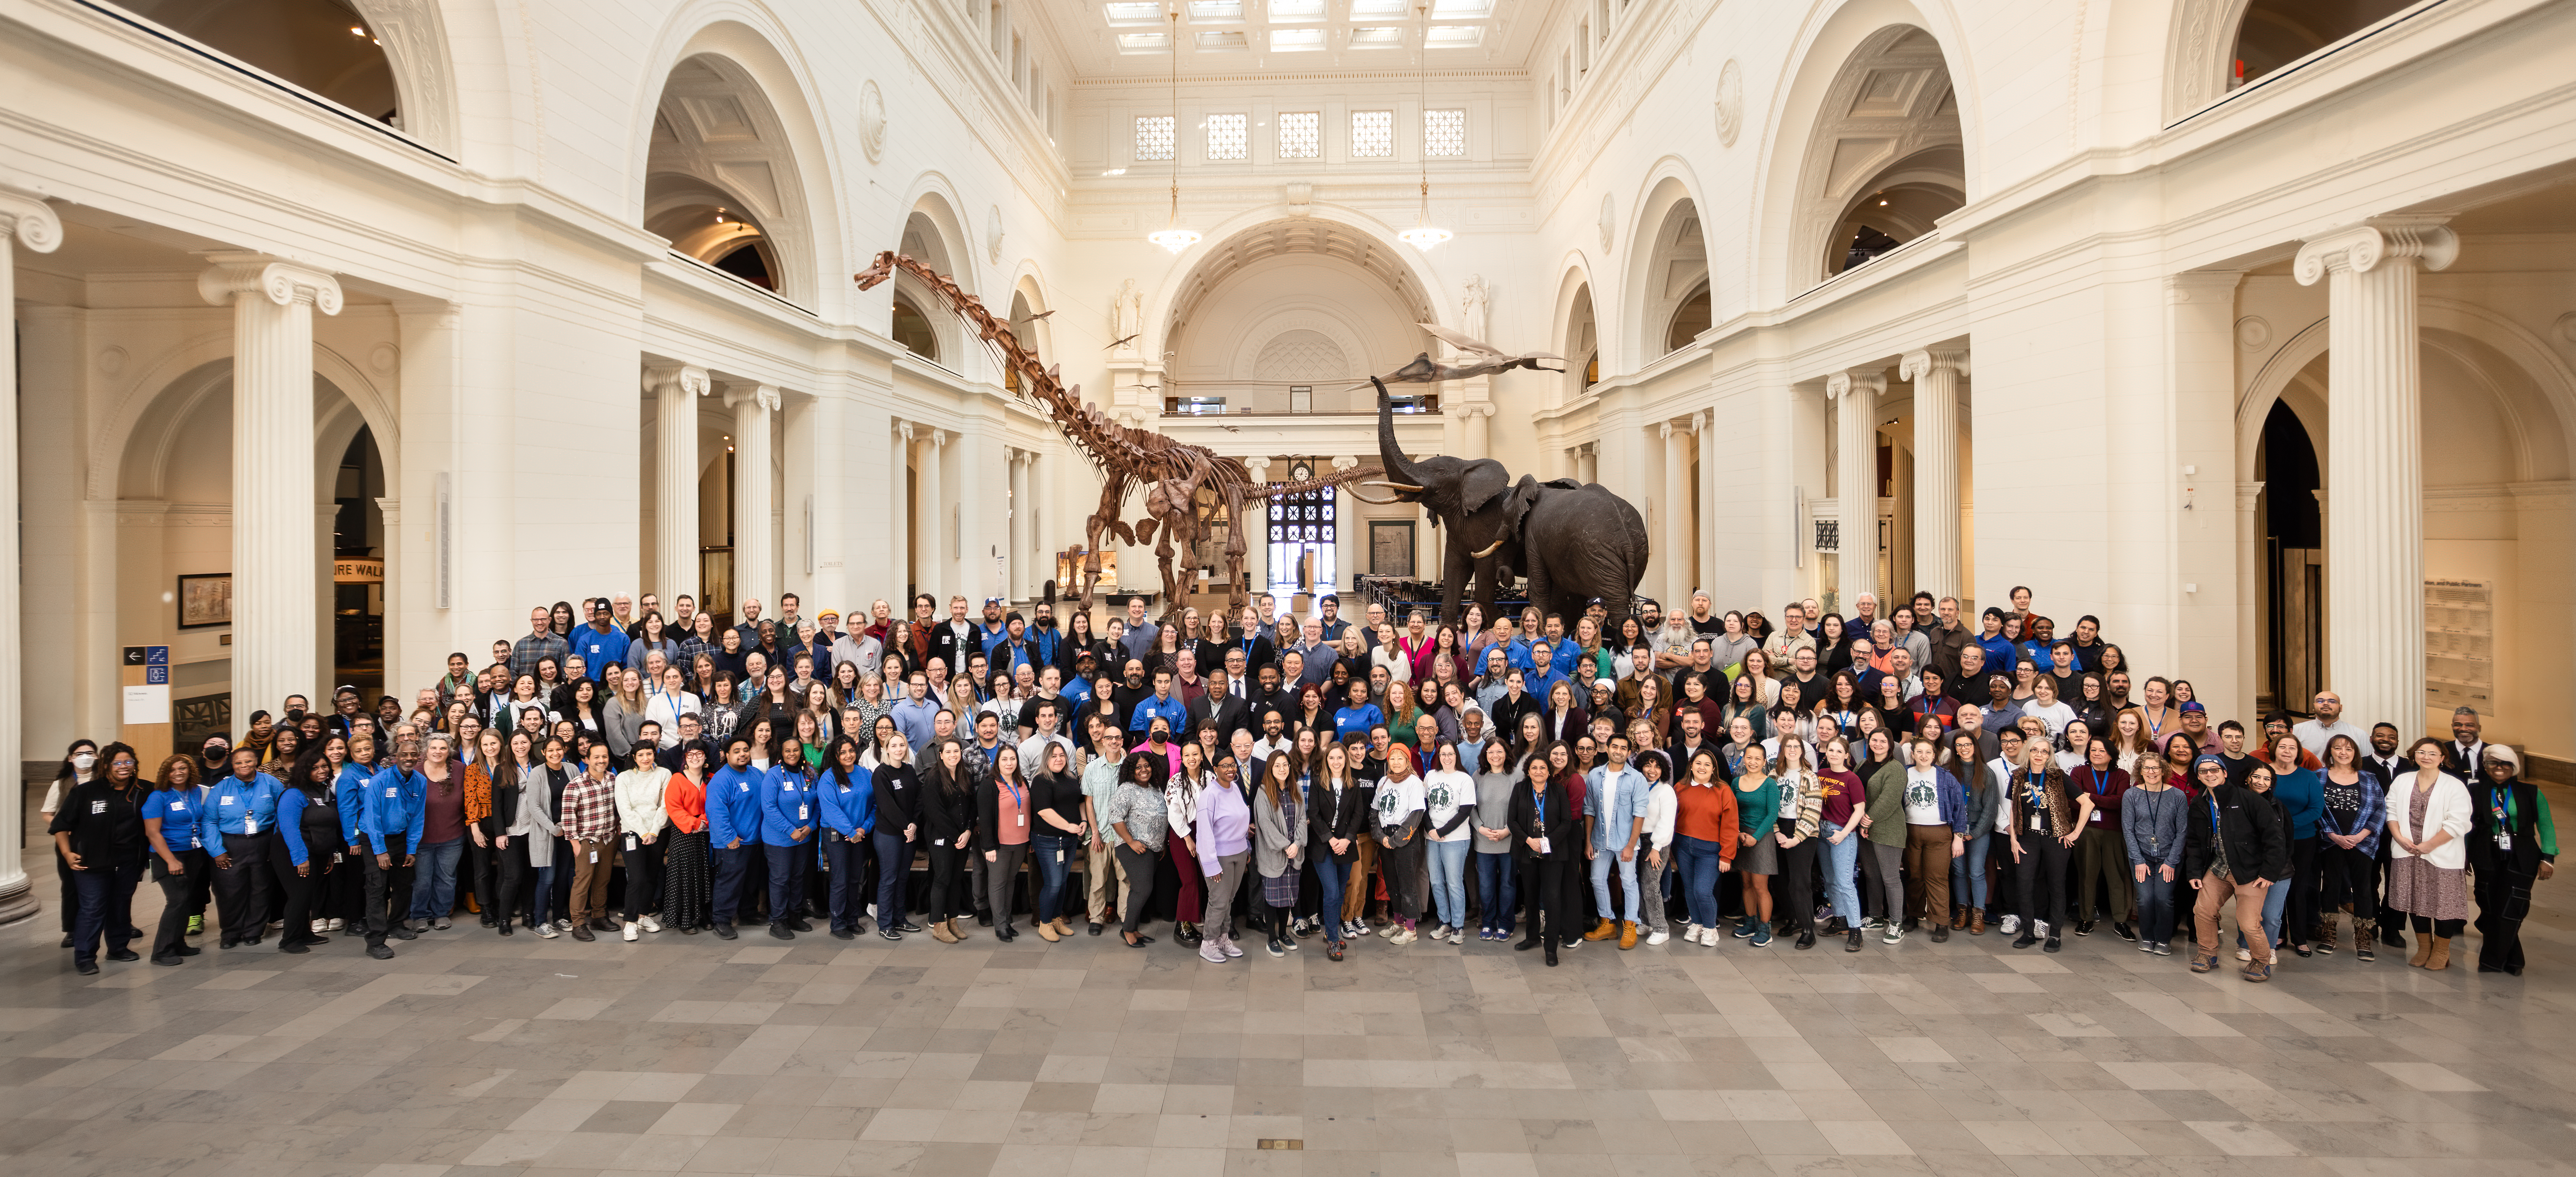 A large group of people standing together in a large exhbition hall, with a dinosaur fossil and taxidermied elephants behind them.